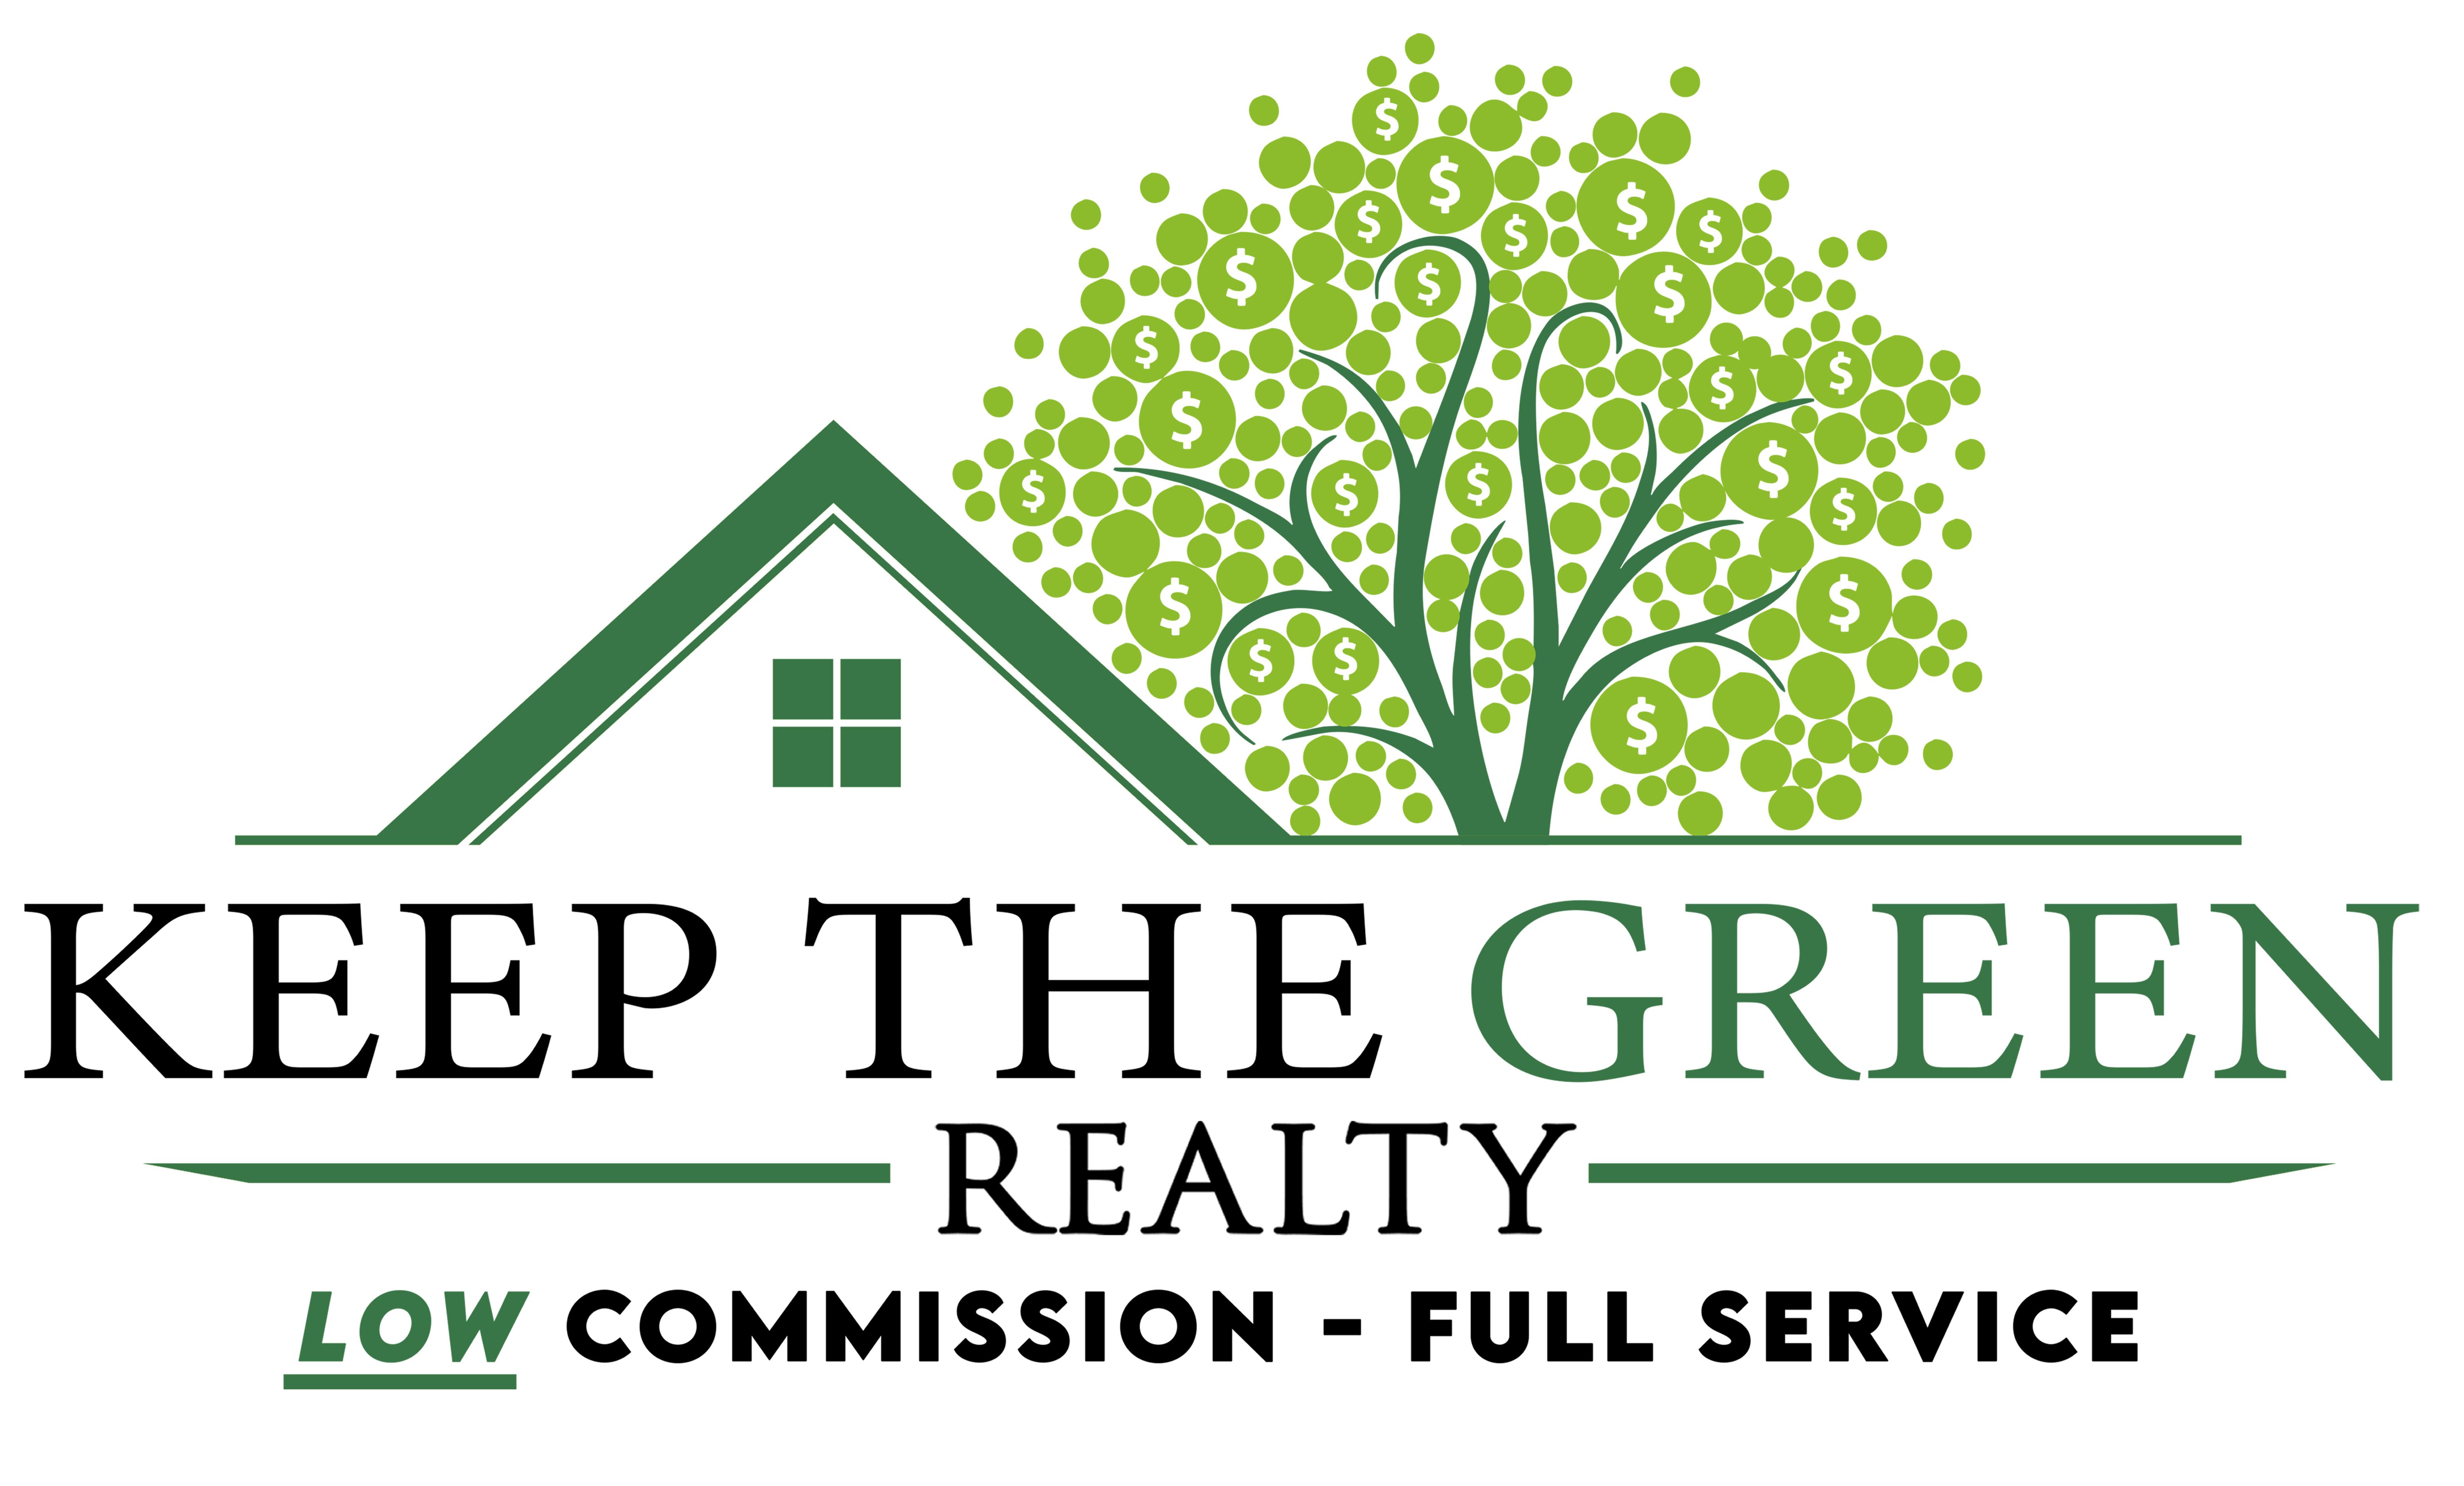 Keep the Green Realty